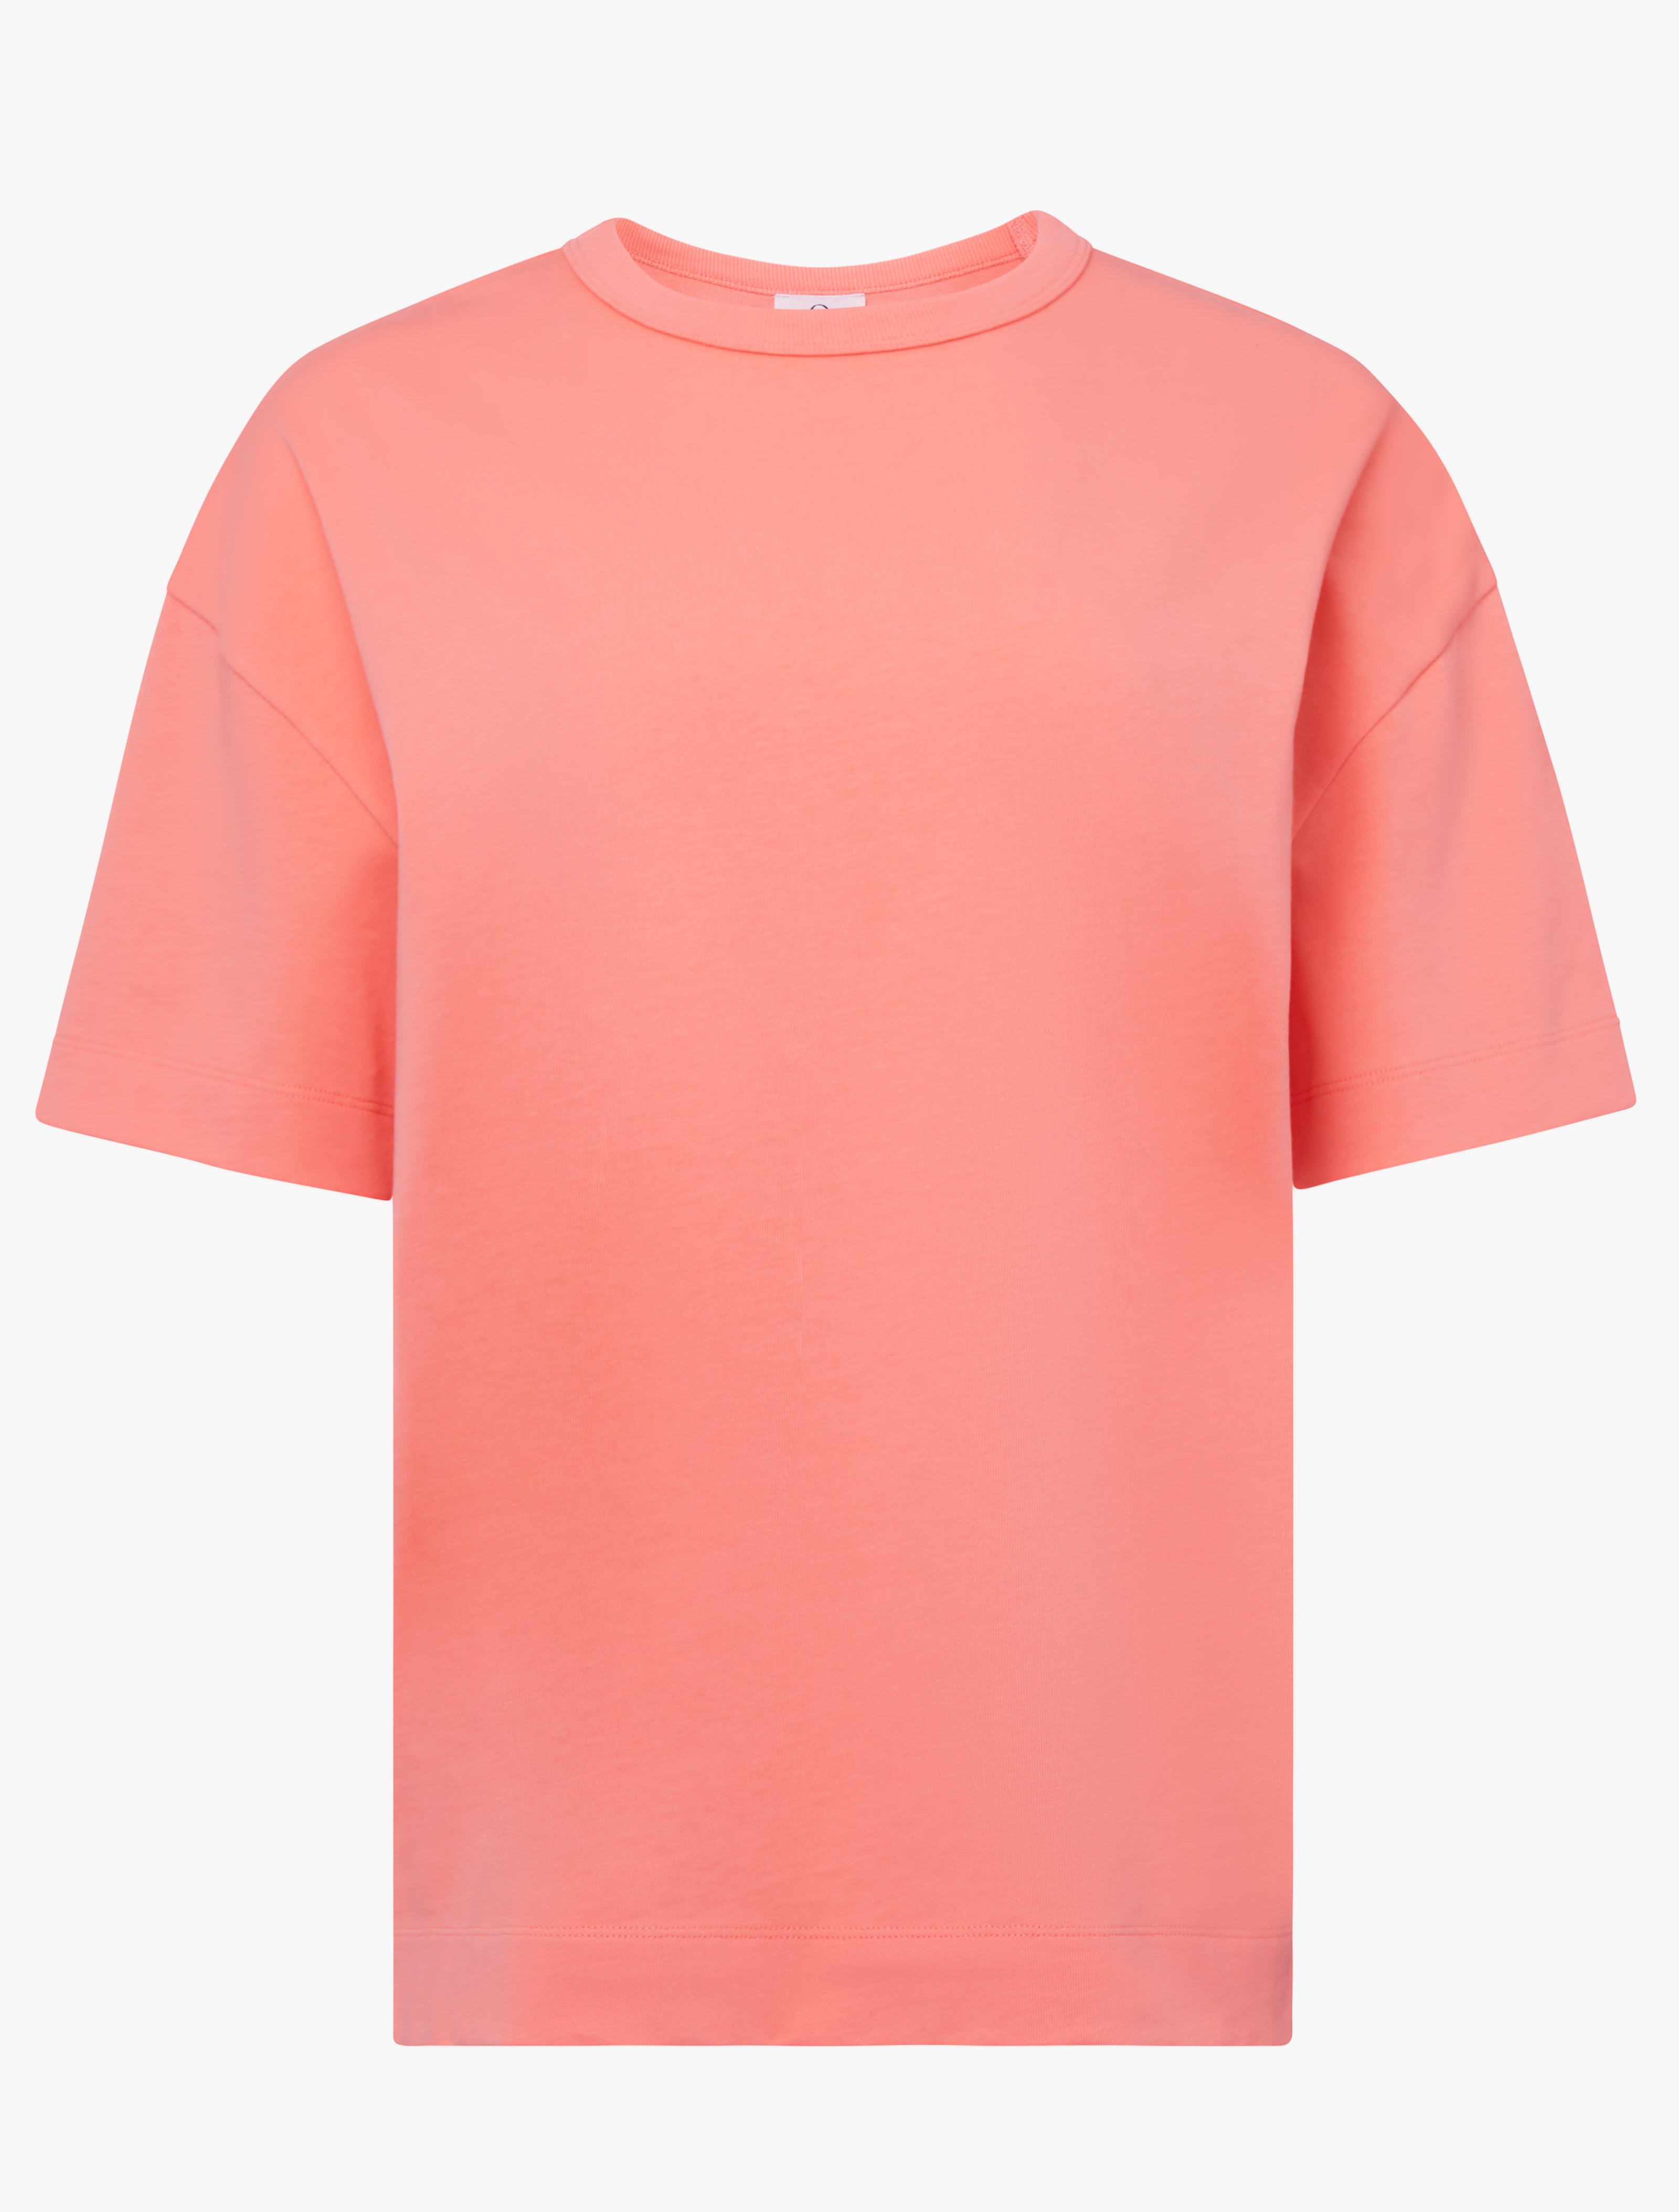 Ninety Percent Lena T-shirt in Coral